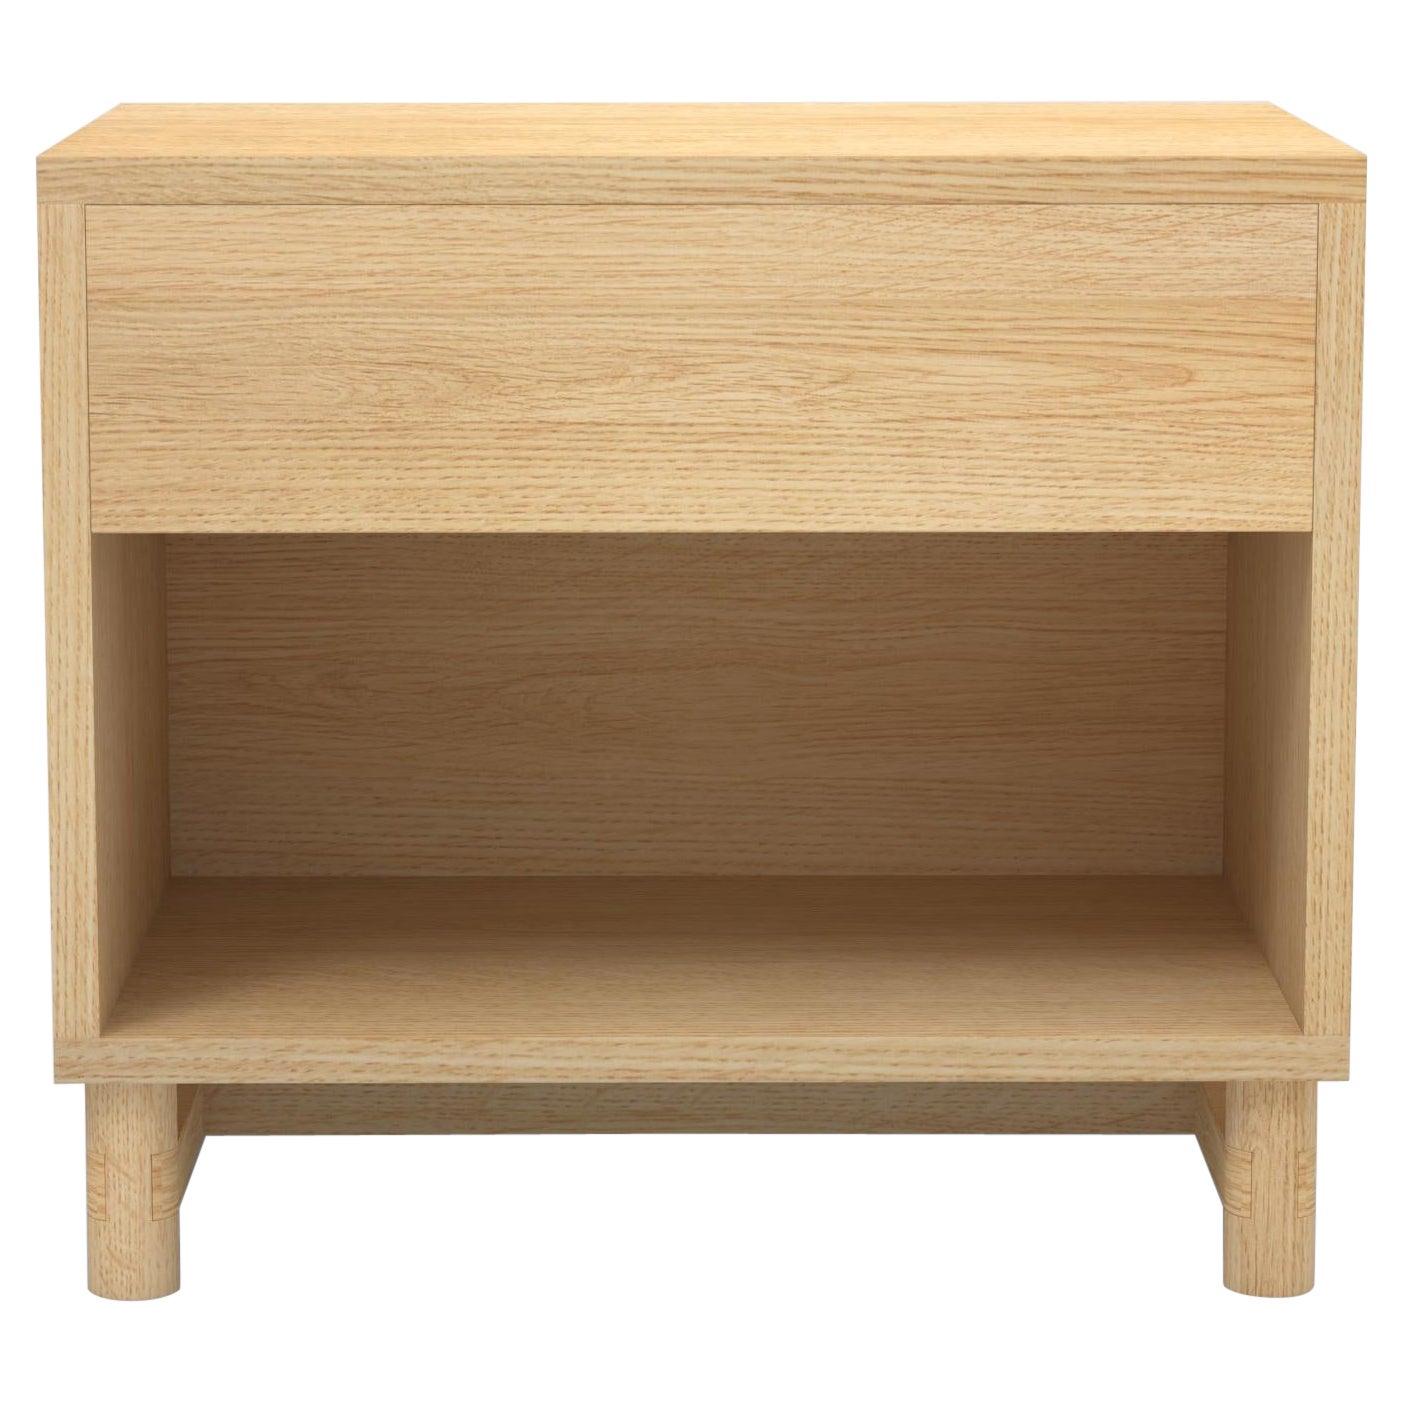 Oak Wood Bedside Table with One '1' Drawer and Bottom Shelf in Oak Clear Lacquer For Sale